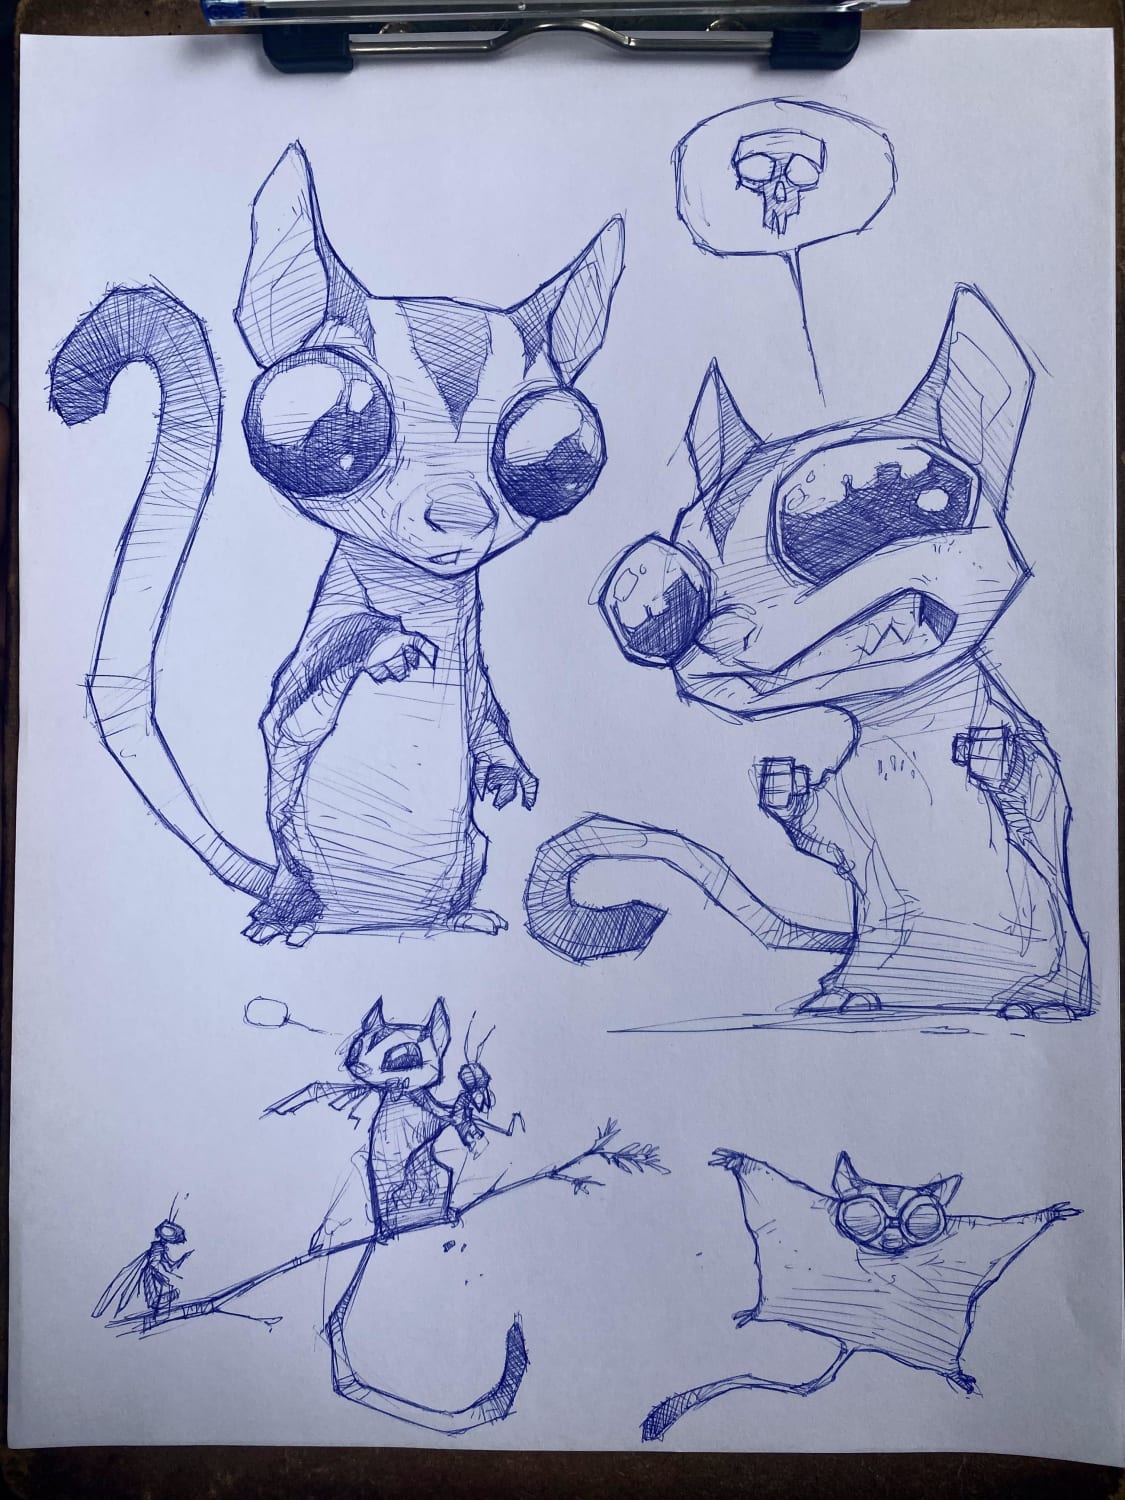 Had to do some sugar glider sketches this morning